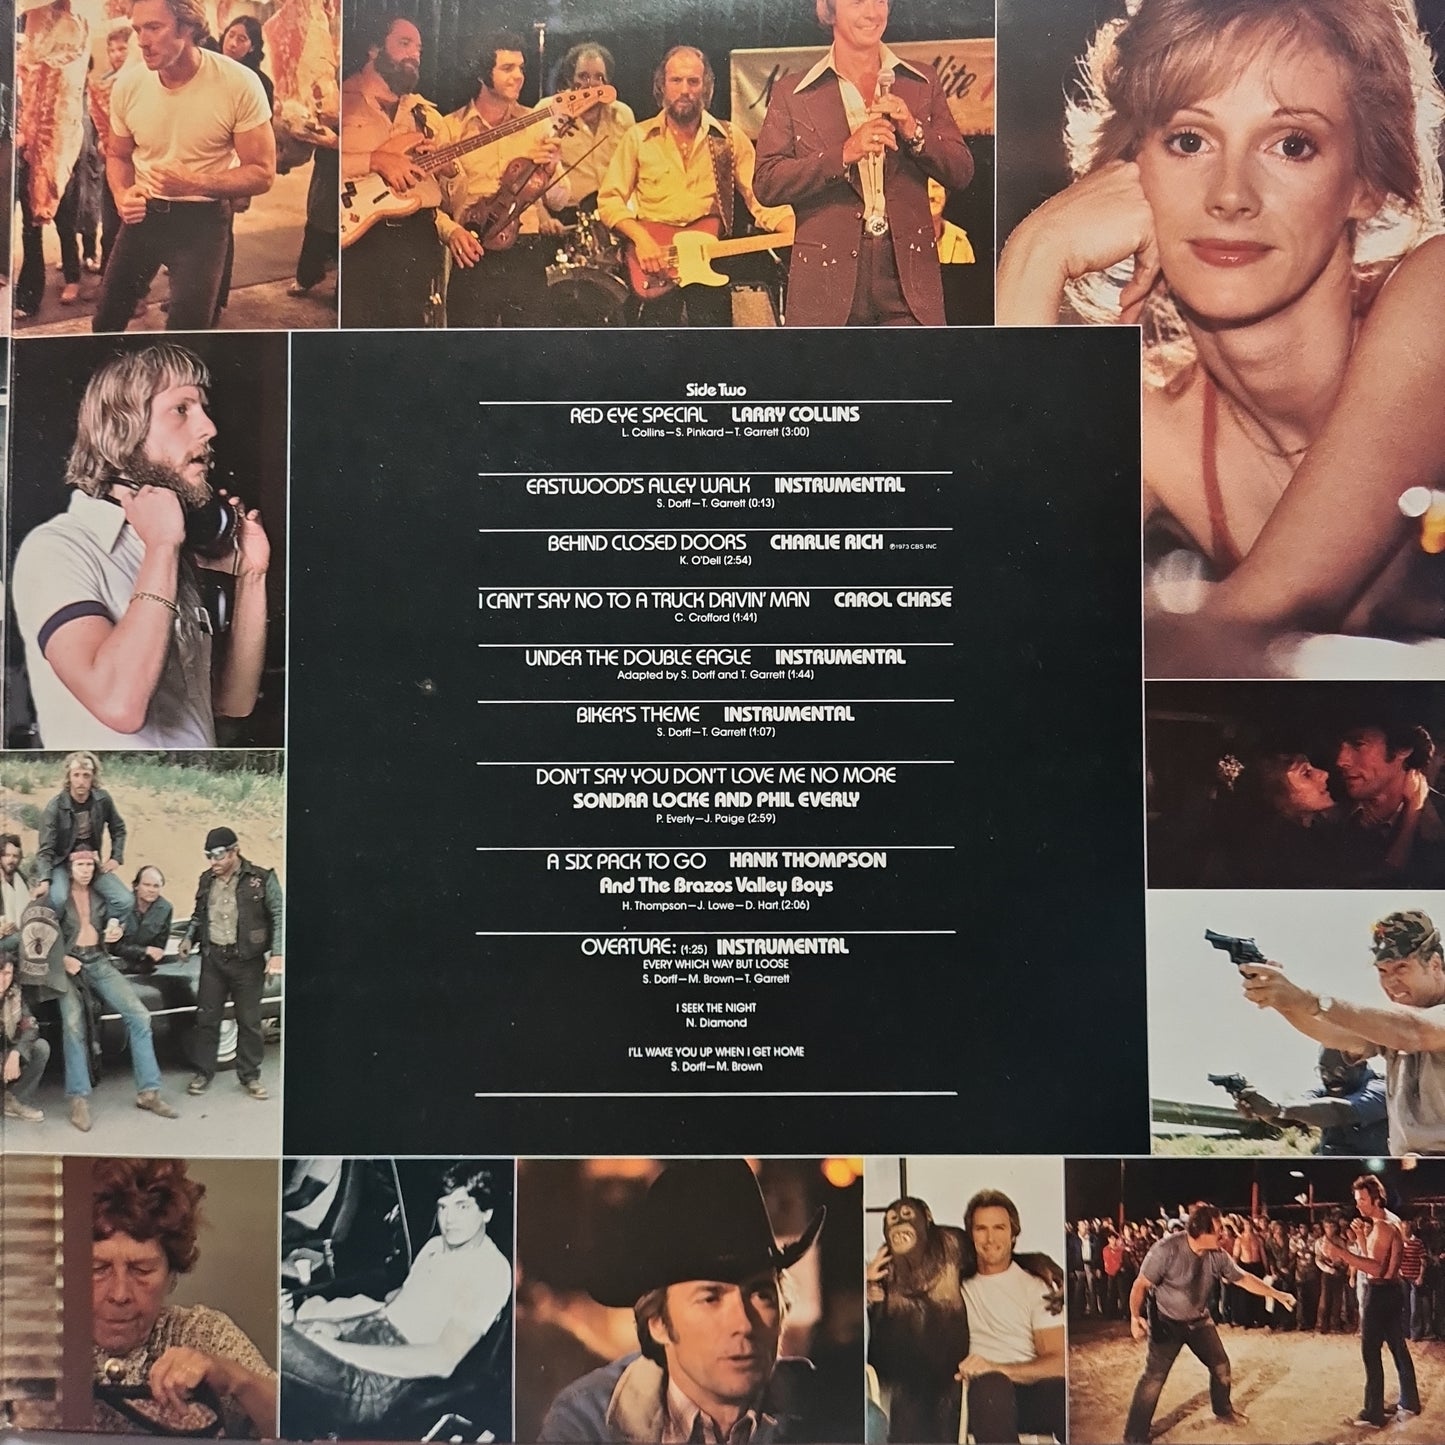 Every Which Way But Loose – Original Soundtrack Music From Clint Eastwood's Film - 1978 - Vinyl Record